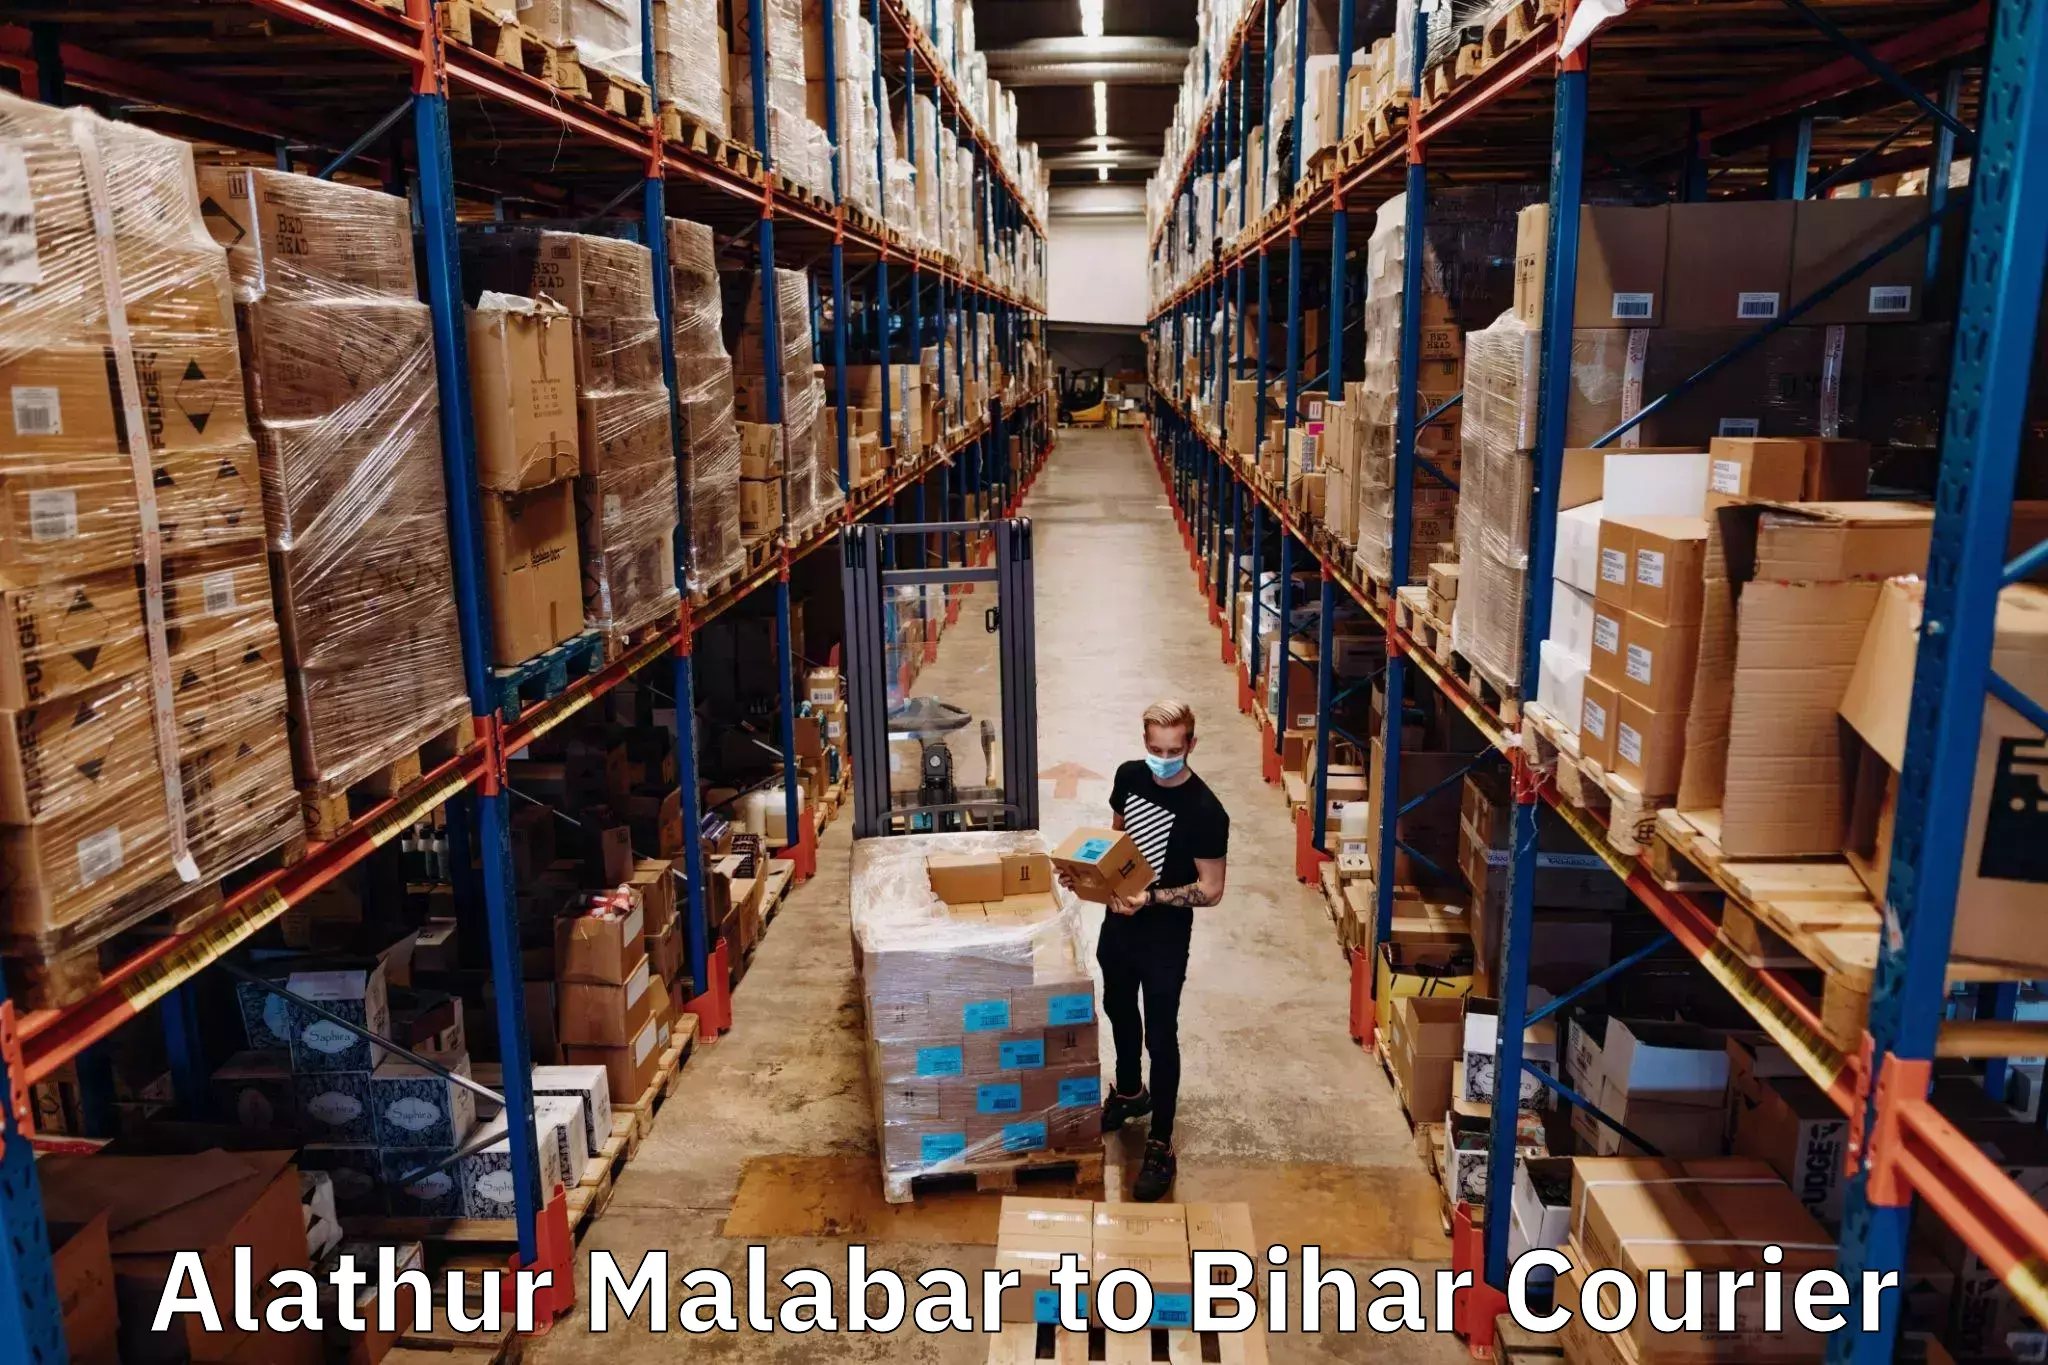 User-friendly delivery service Alathur Malabar to Nuaon